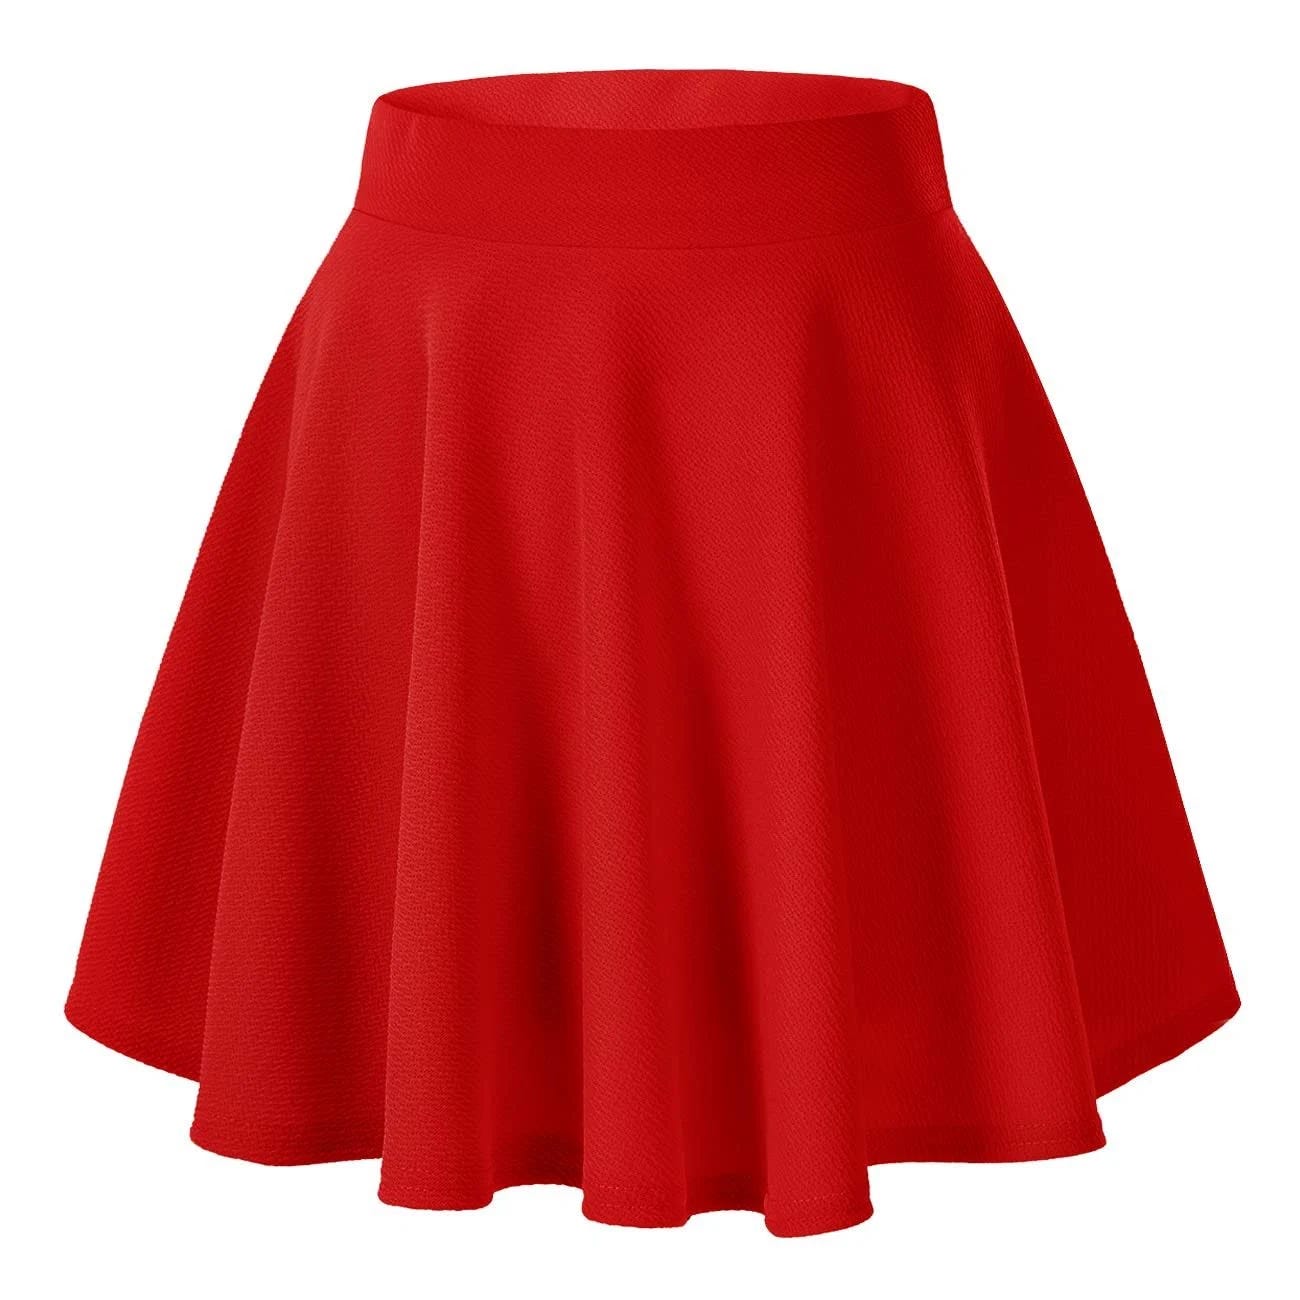 Comfortable Red Flared Skater Skirt for Casual Occasions | Image